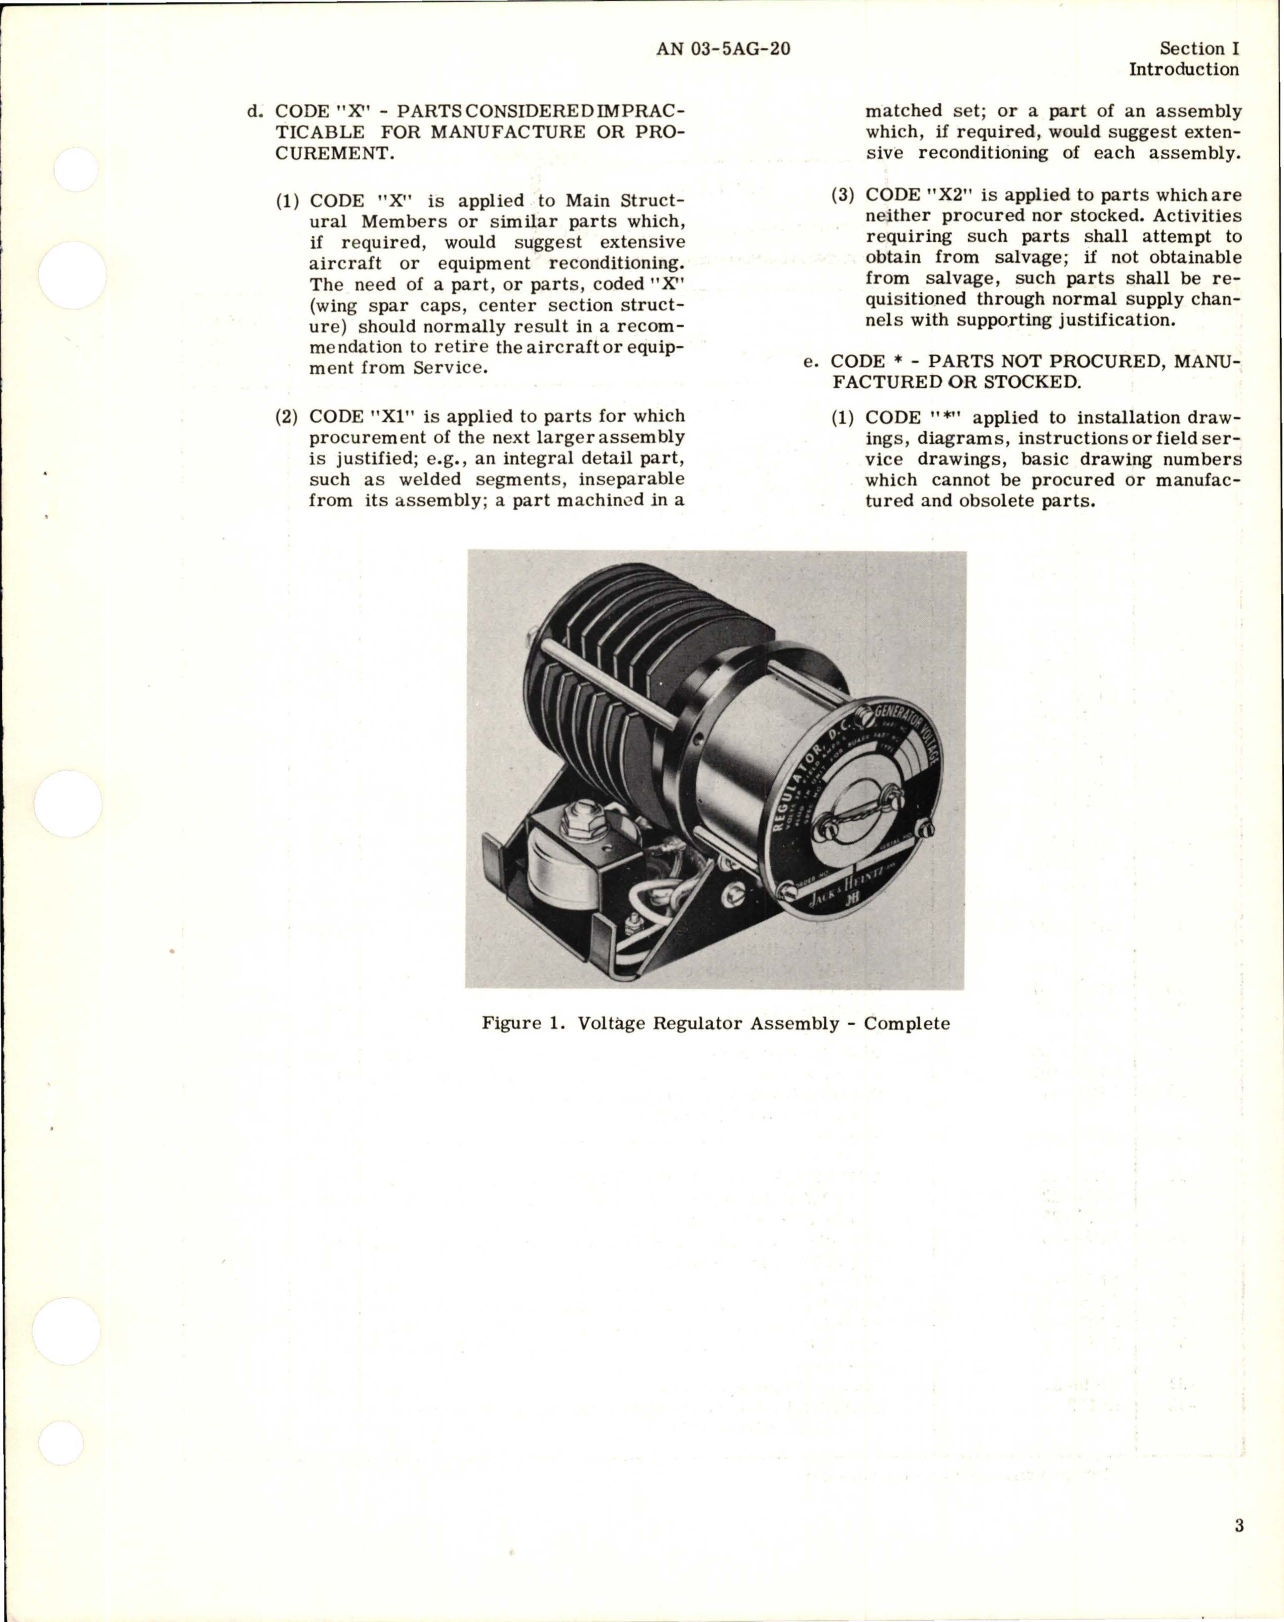 Sample page 5 from AirCorps Library document: Illustrated Parts Breakdown for Voltage Regulator - Model GR28